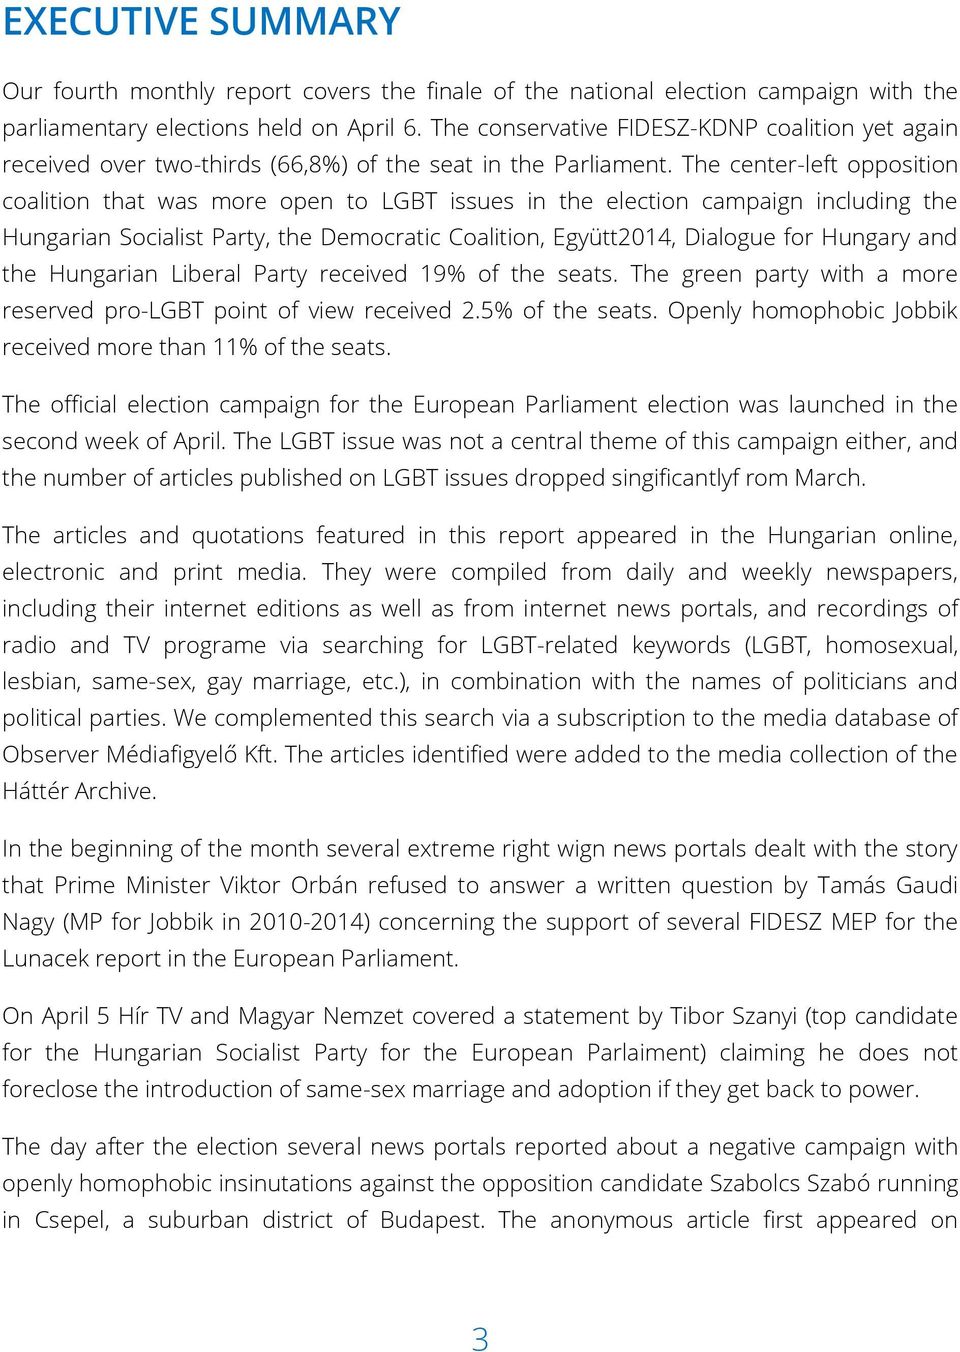 The center-left opposition coalition that was more open to LGBT issues in the election campaign including the Hungarian Socialist Party, the Democratic Coalition, Együtt2014, Dialogue for Hungary and